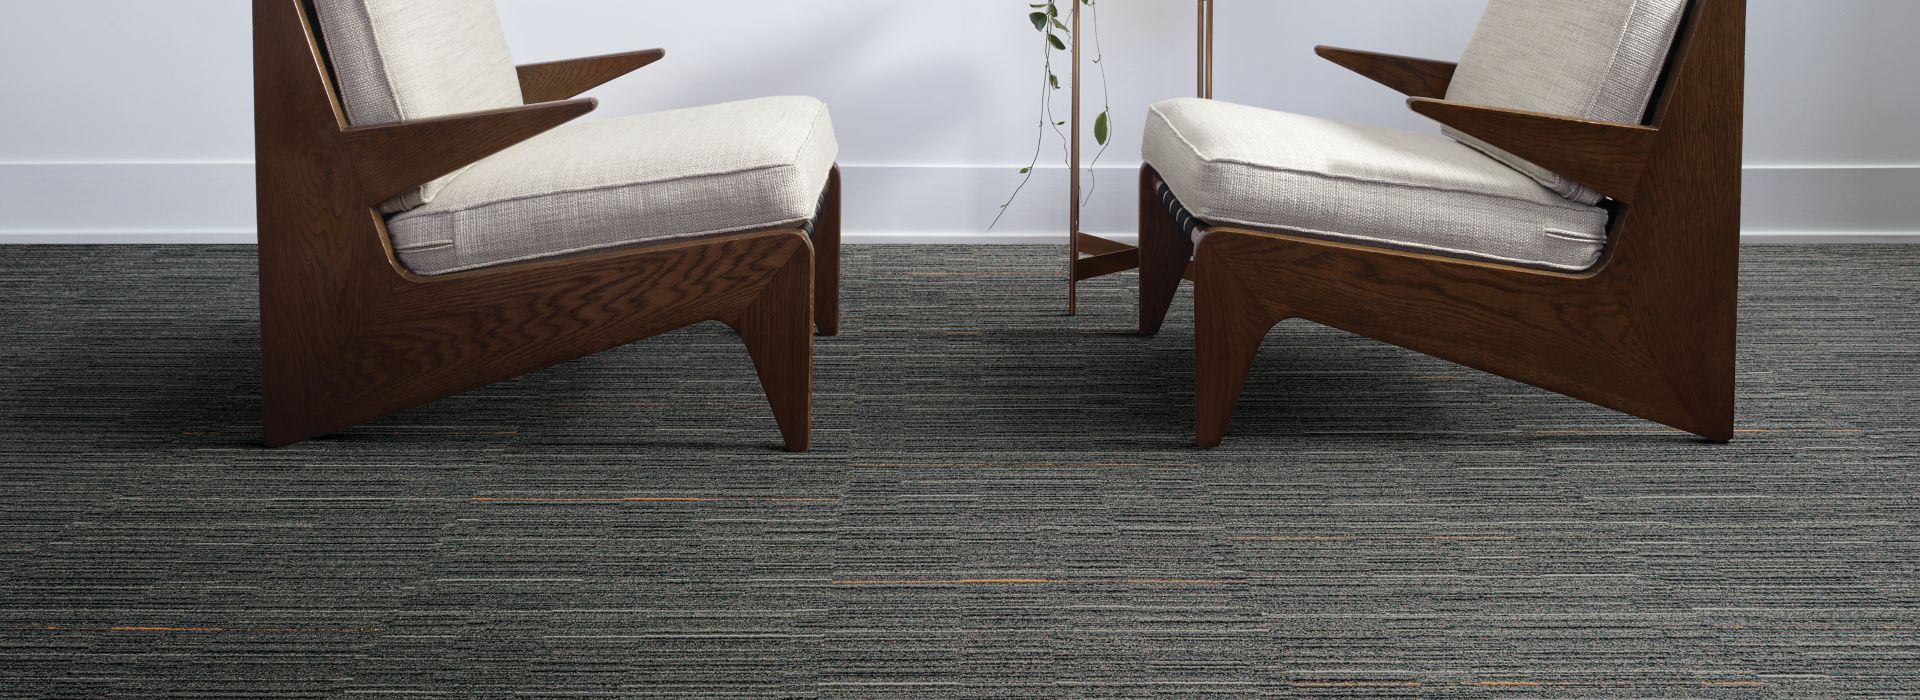 Interface Alliteration and Palindrome carpet tile in small seating area with multiple, framed prints on the wall